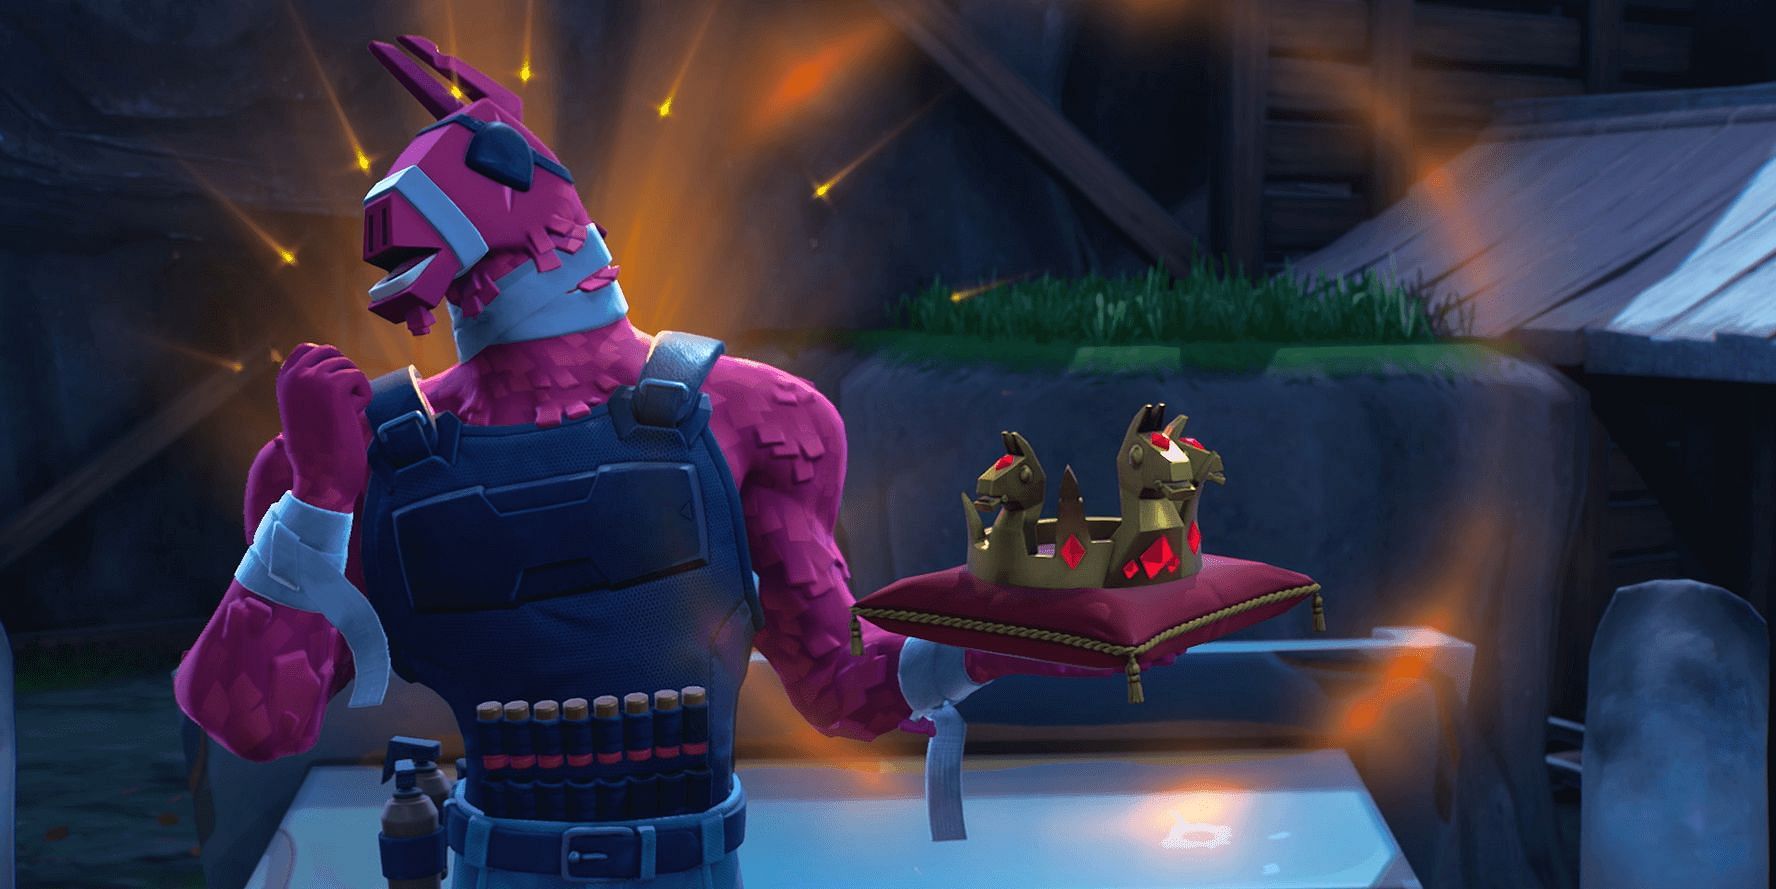 Victory Crowns in Fortnite Chapter 3 Season 1 (Image via Epic Games)